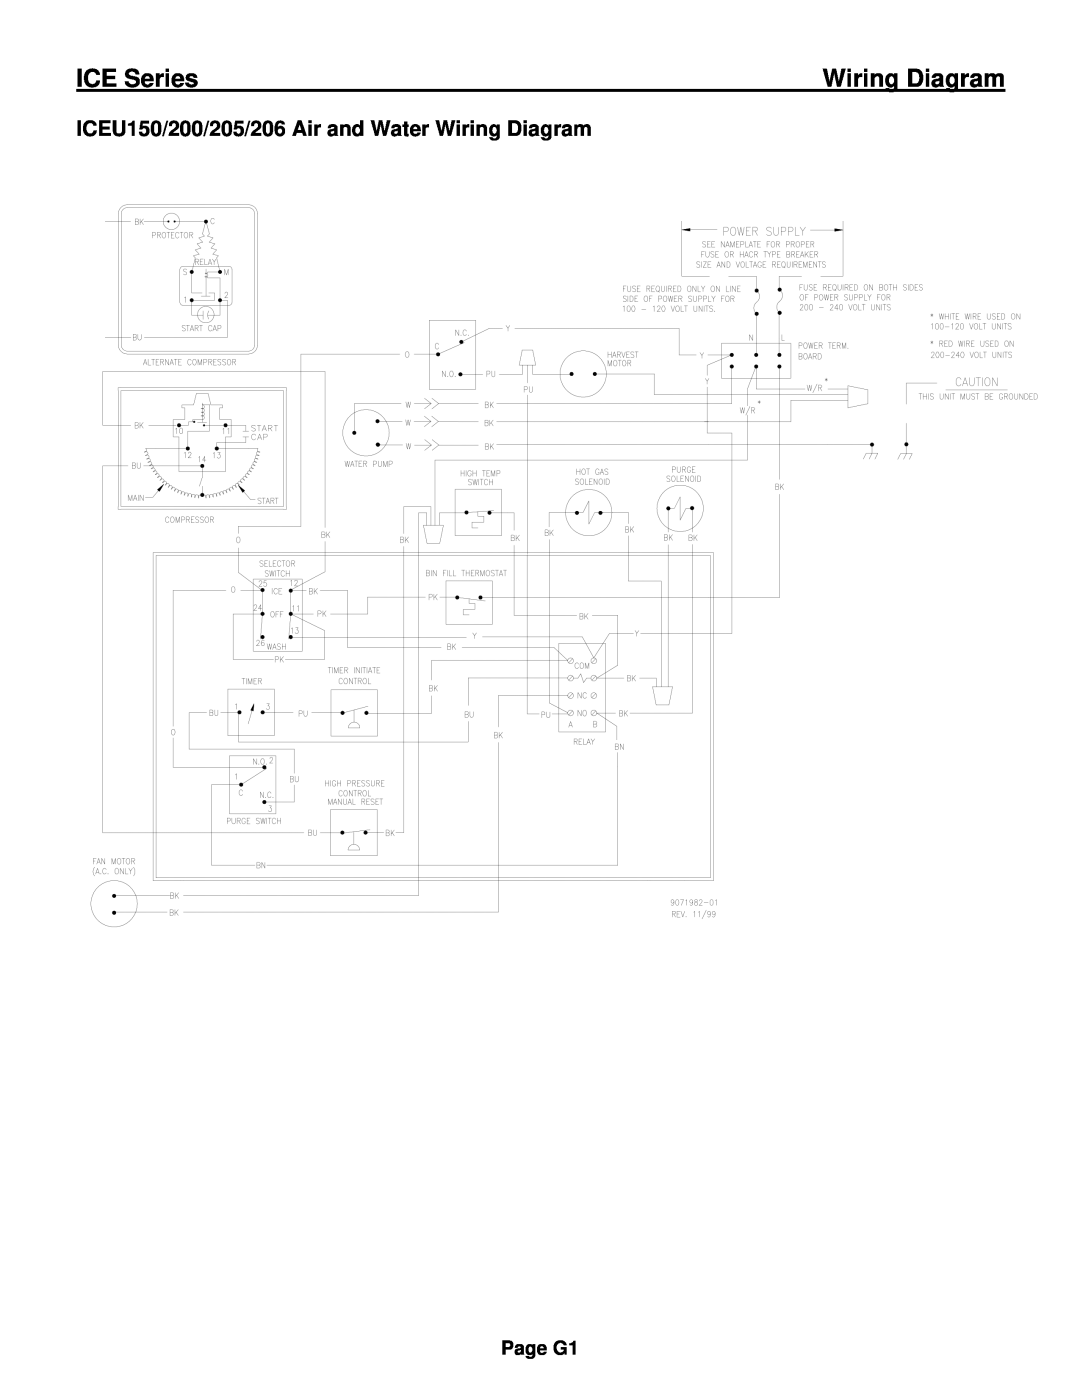 Ice-O-Matic ICE0250 Series installation manual ICEU150/200/205/206 Air and Water Wiring Diagram, ICE Series 